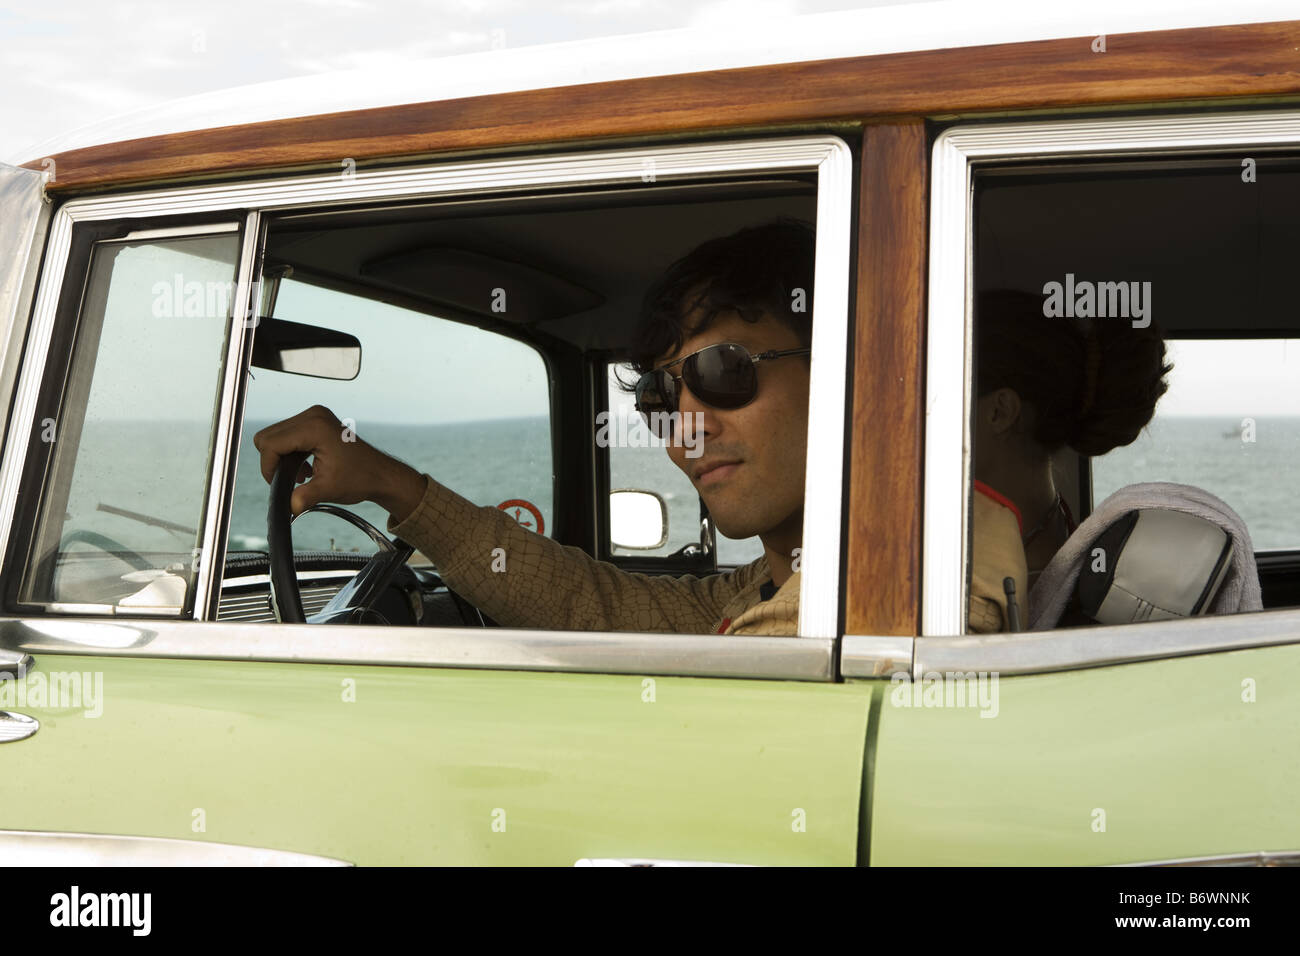 man looks out of window of vintage car in glasses Stock Photo